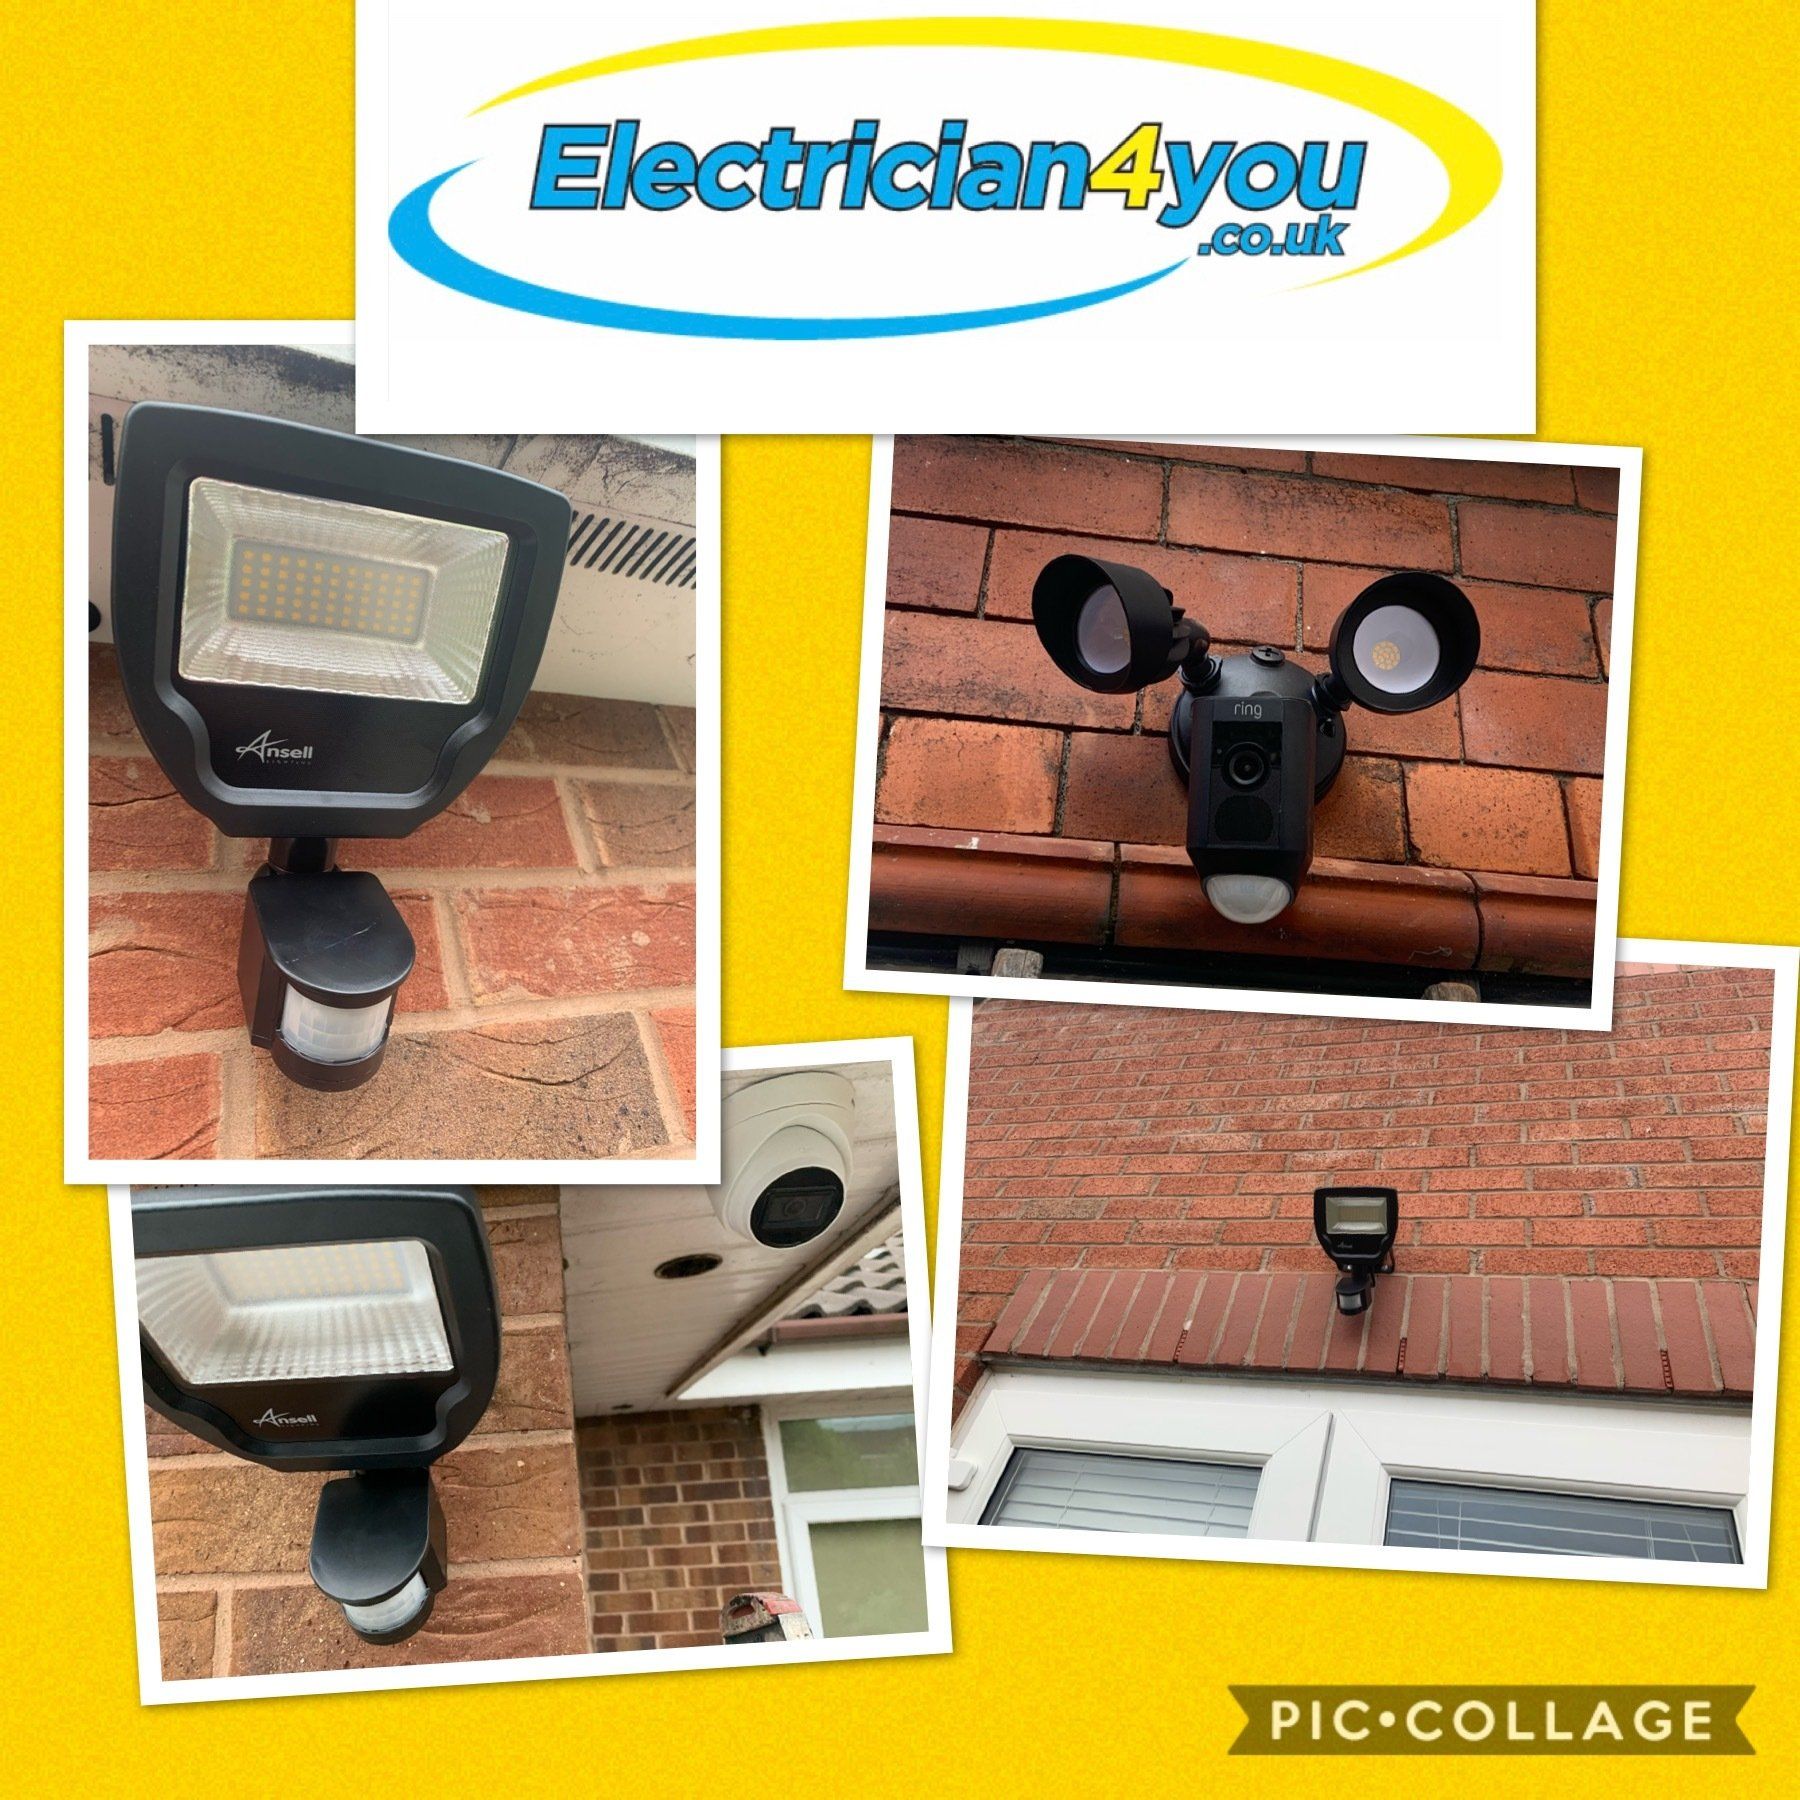 OUT DOOR SOCKETS FITTED IN WARRINGTON, FLOOD LIGHTS FITTED IN WARRINGTON BY AN ELECTRICIAN NEAR ME